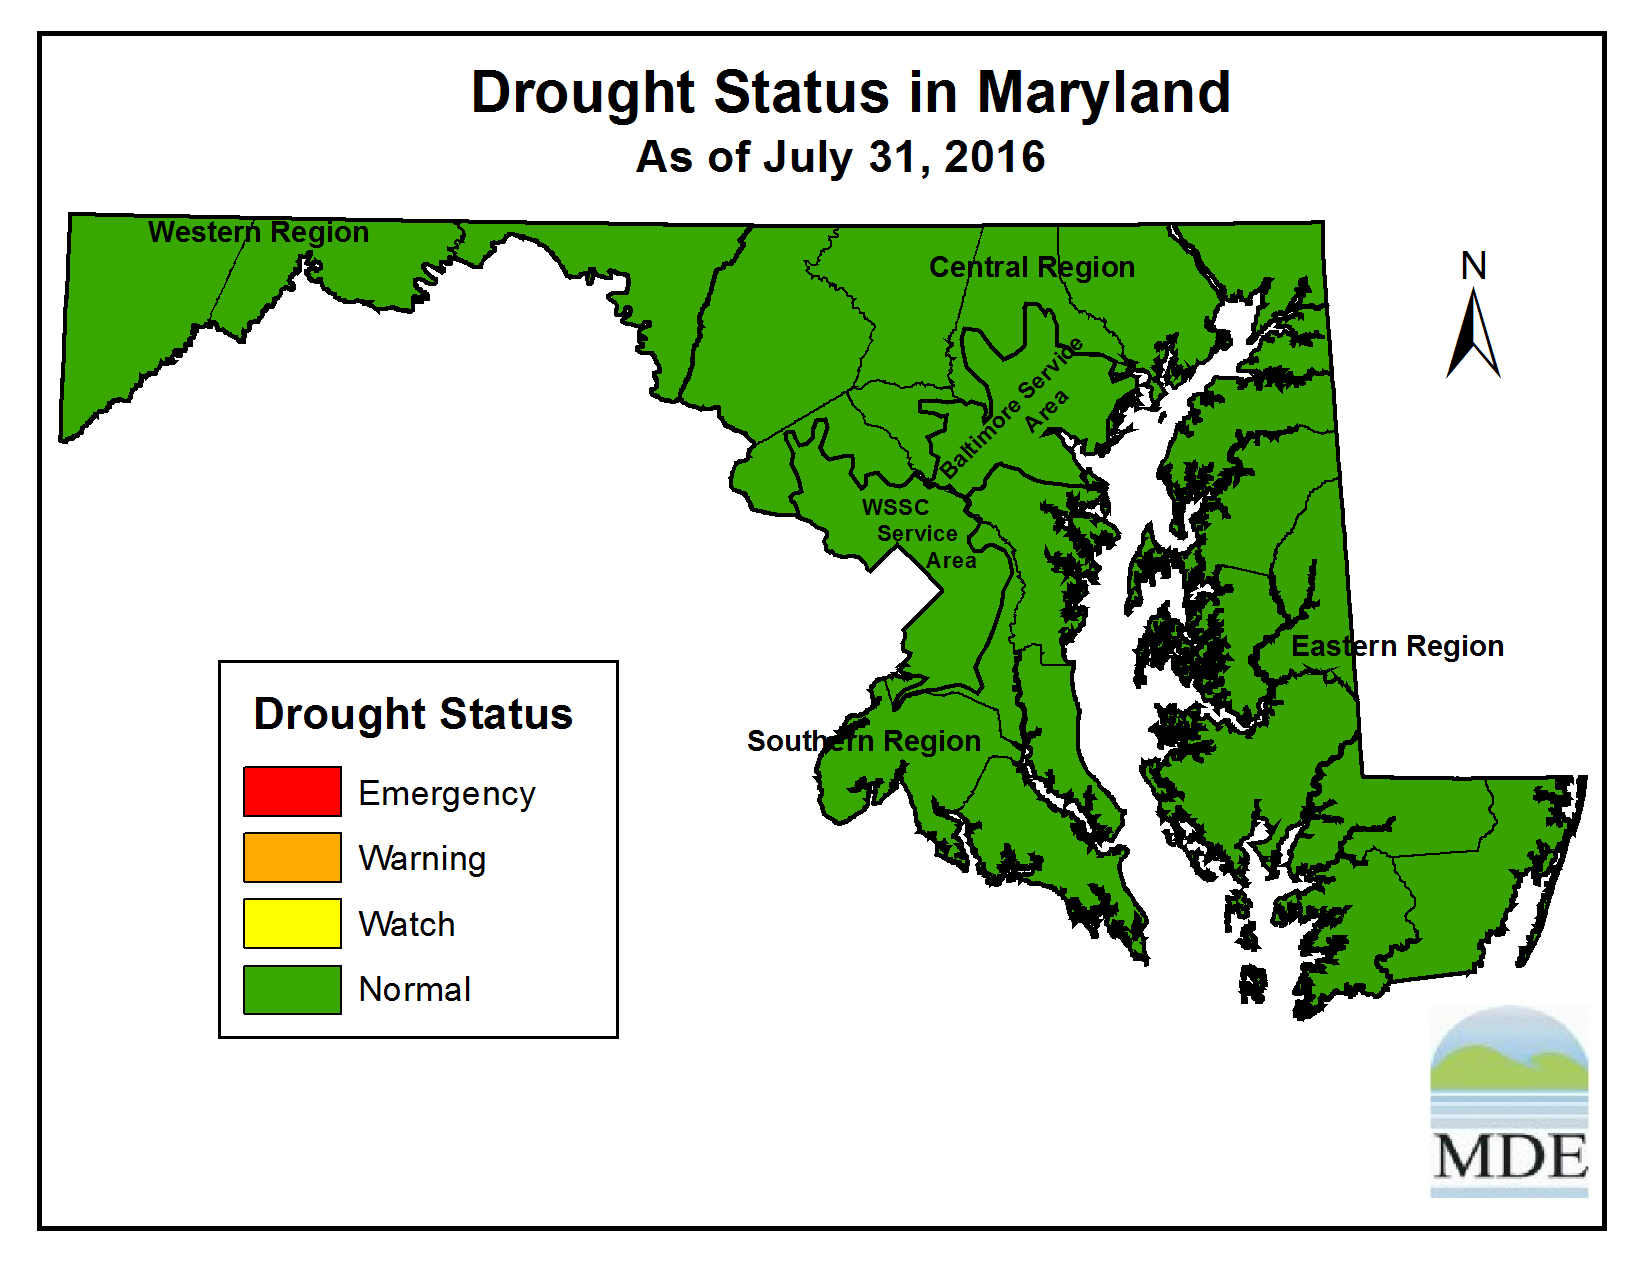 Drought Status as of July 31, 2016